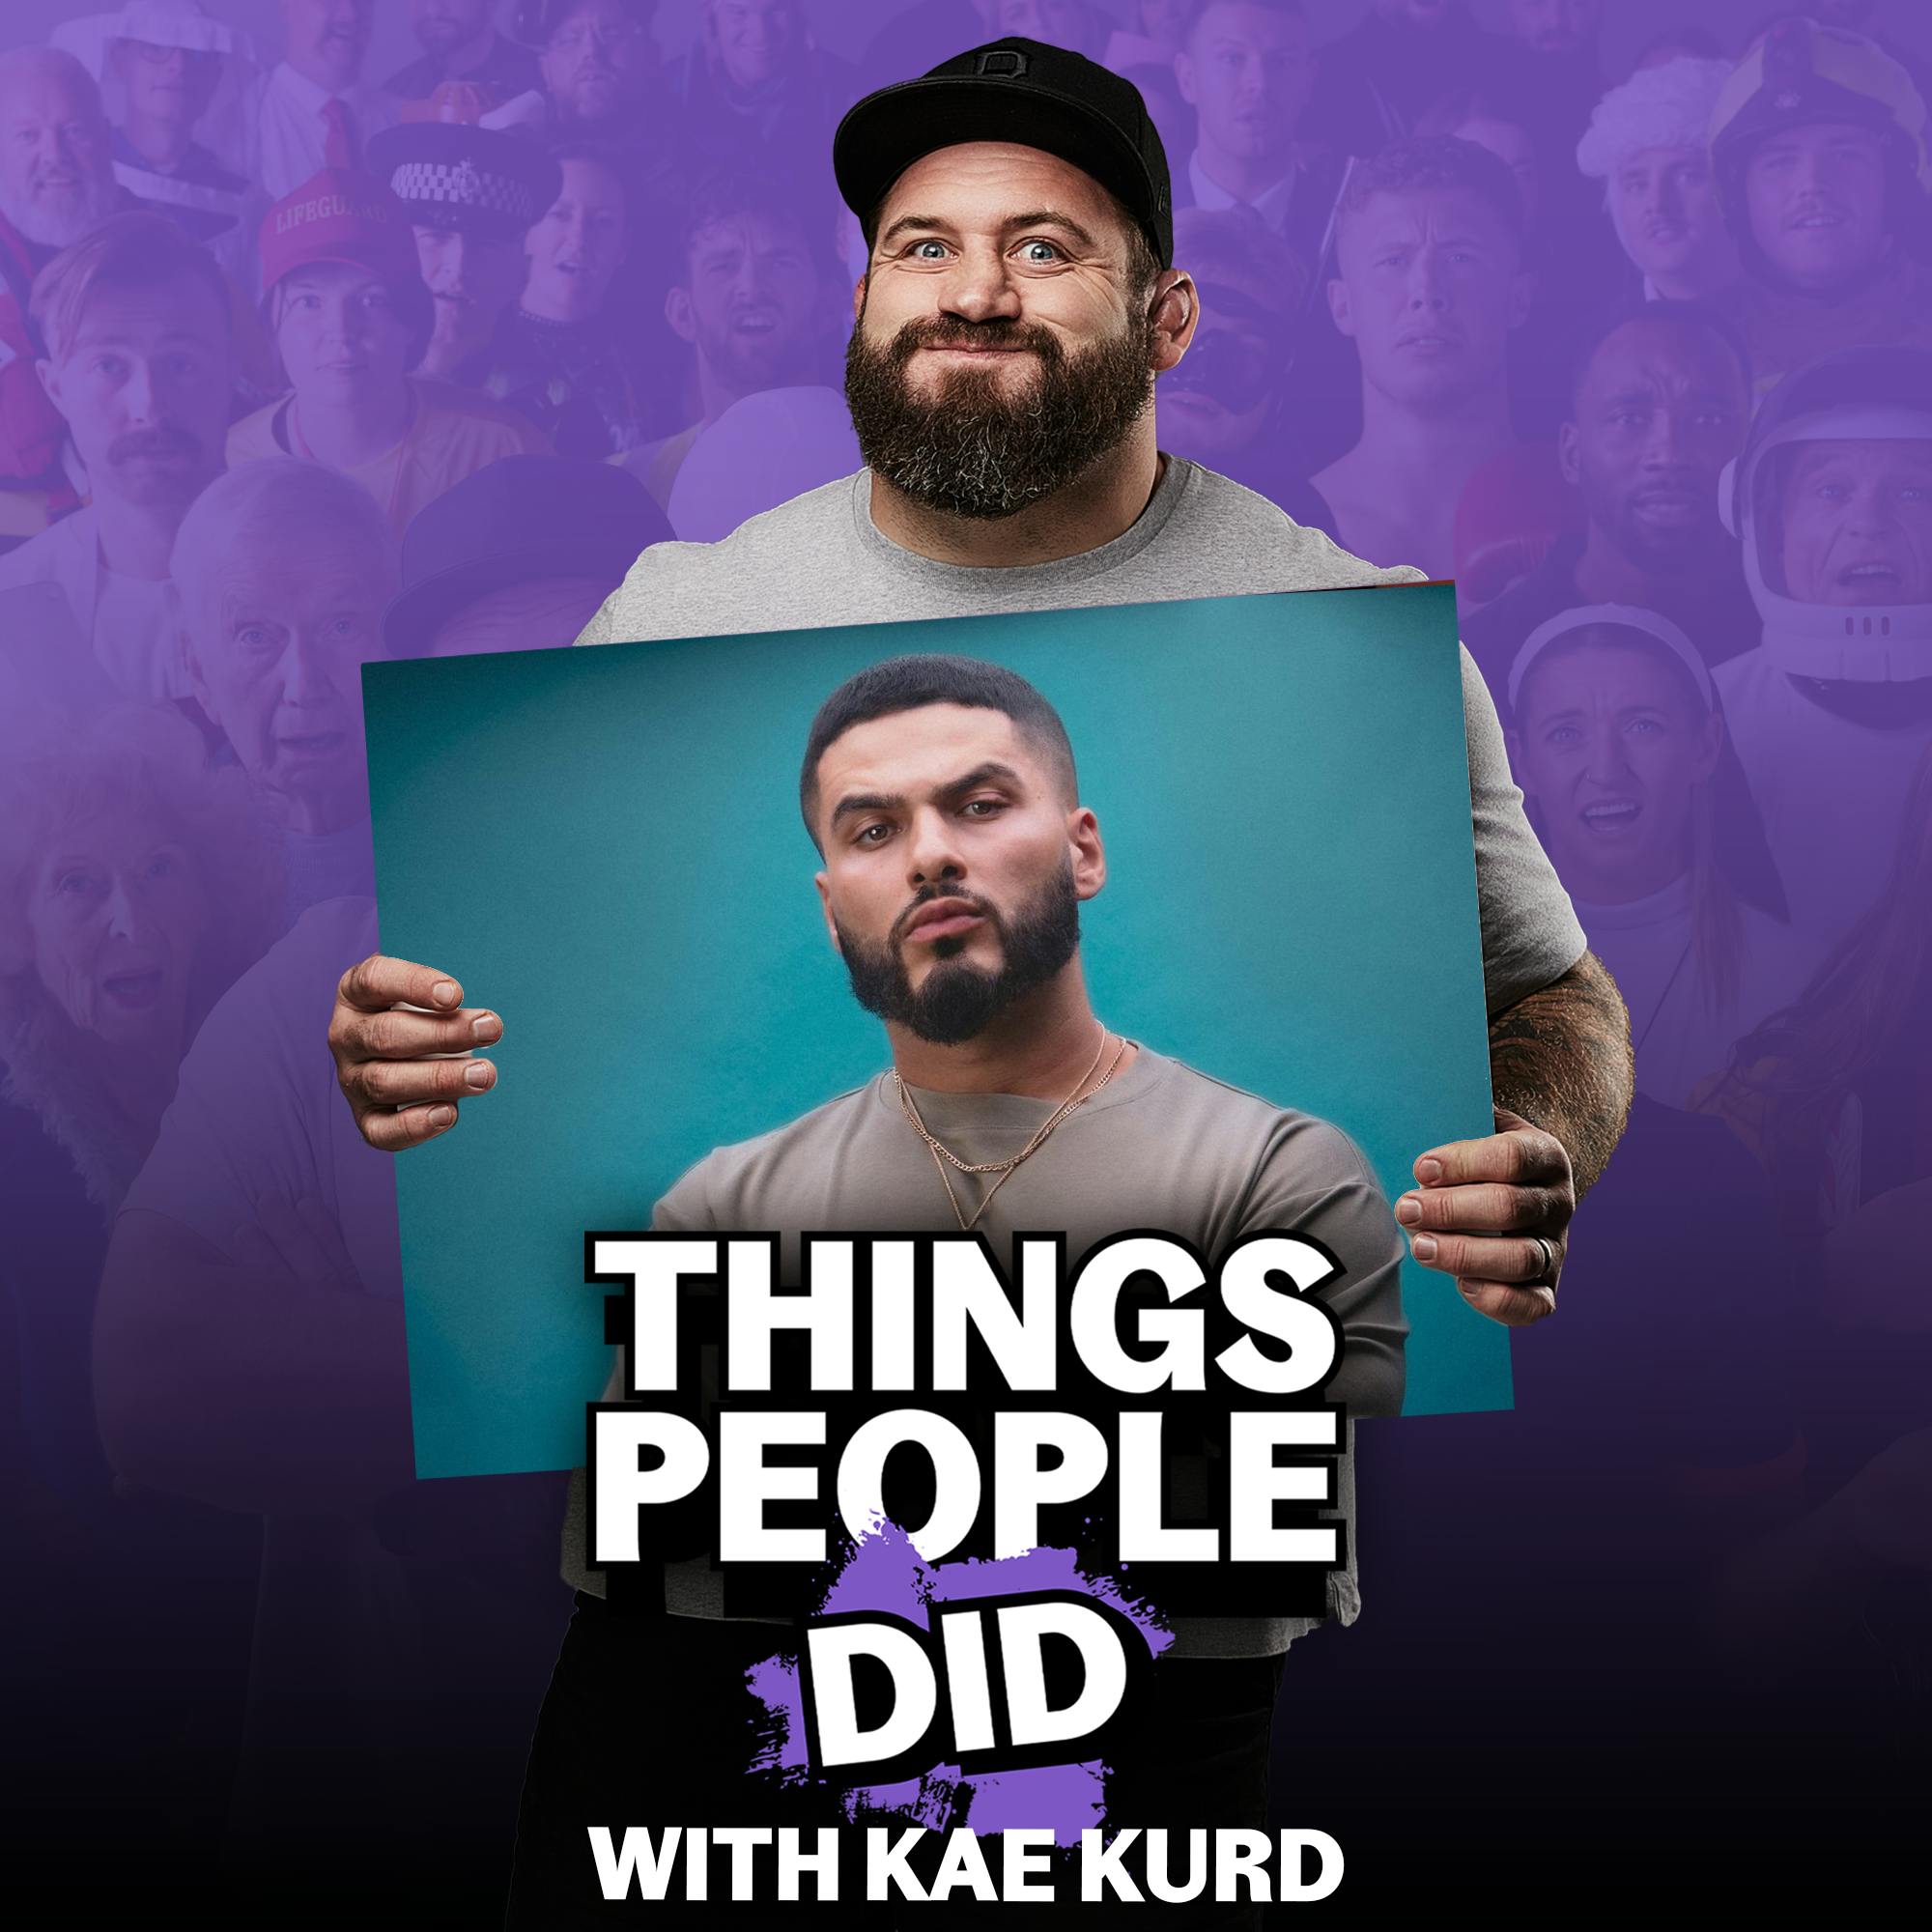 Things People Did, with Kae Kurd: Next in Croydon, service stations and Angelina Jolie in the Apple store